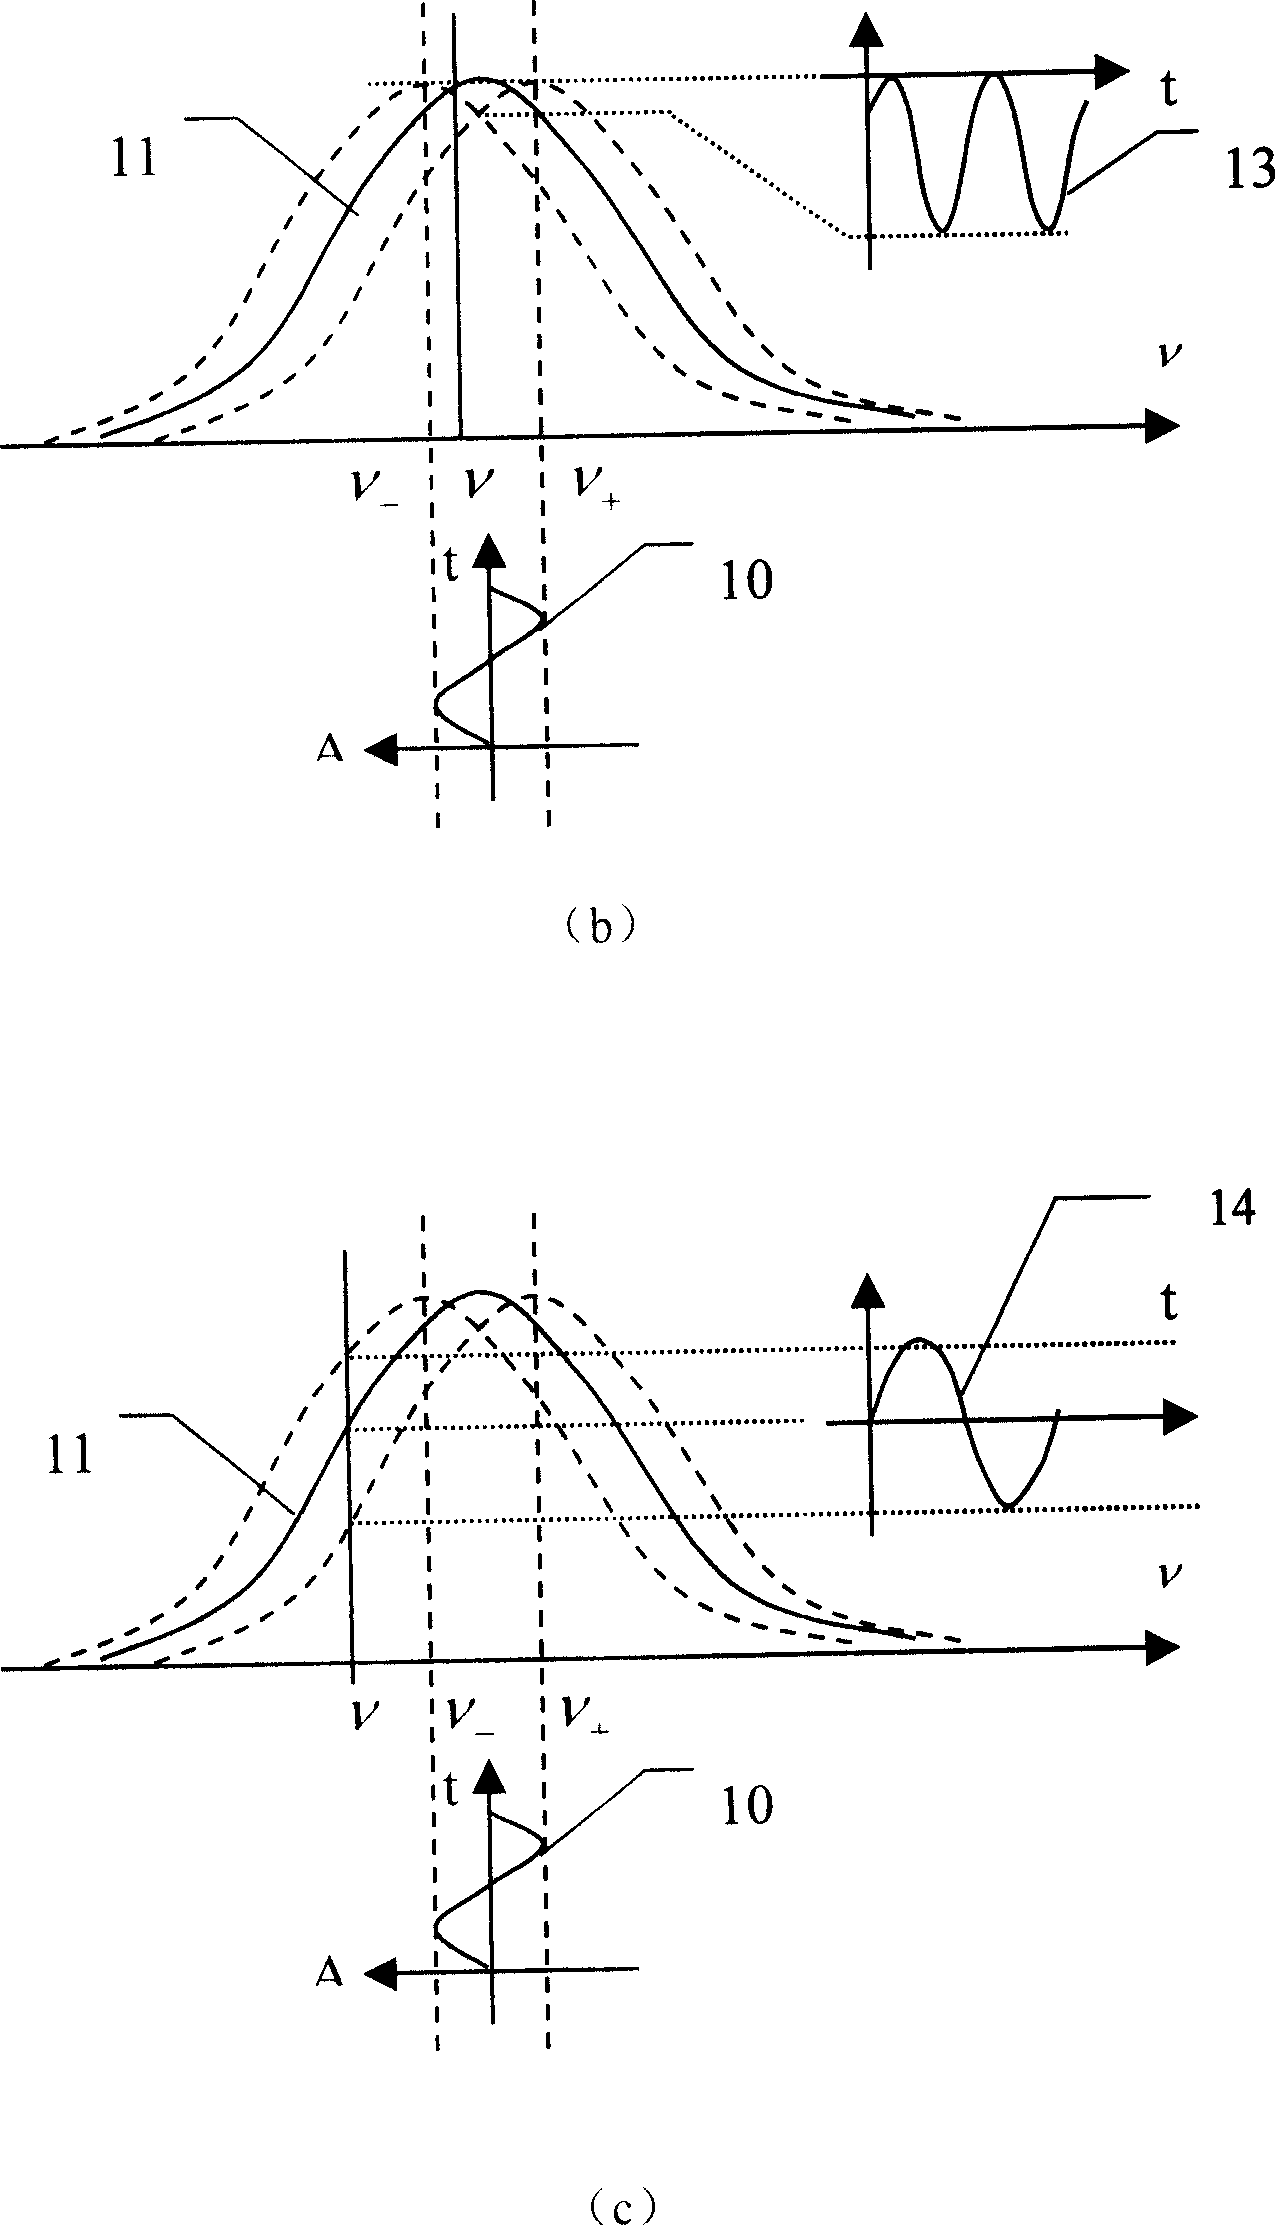 A phase-lock laser frequency stabilization method